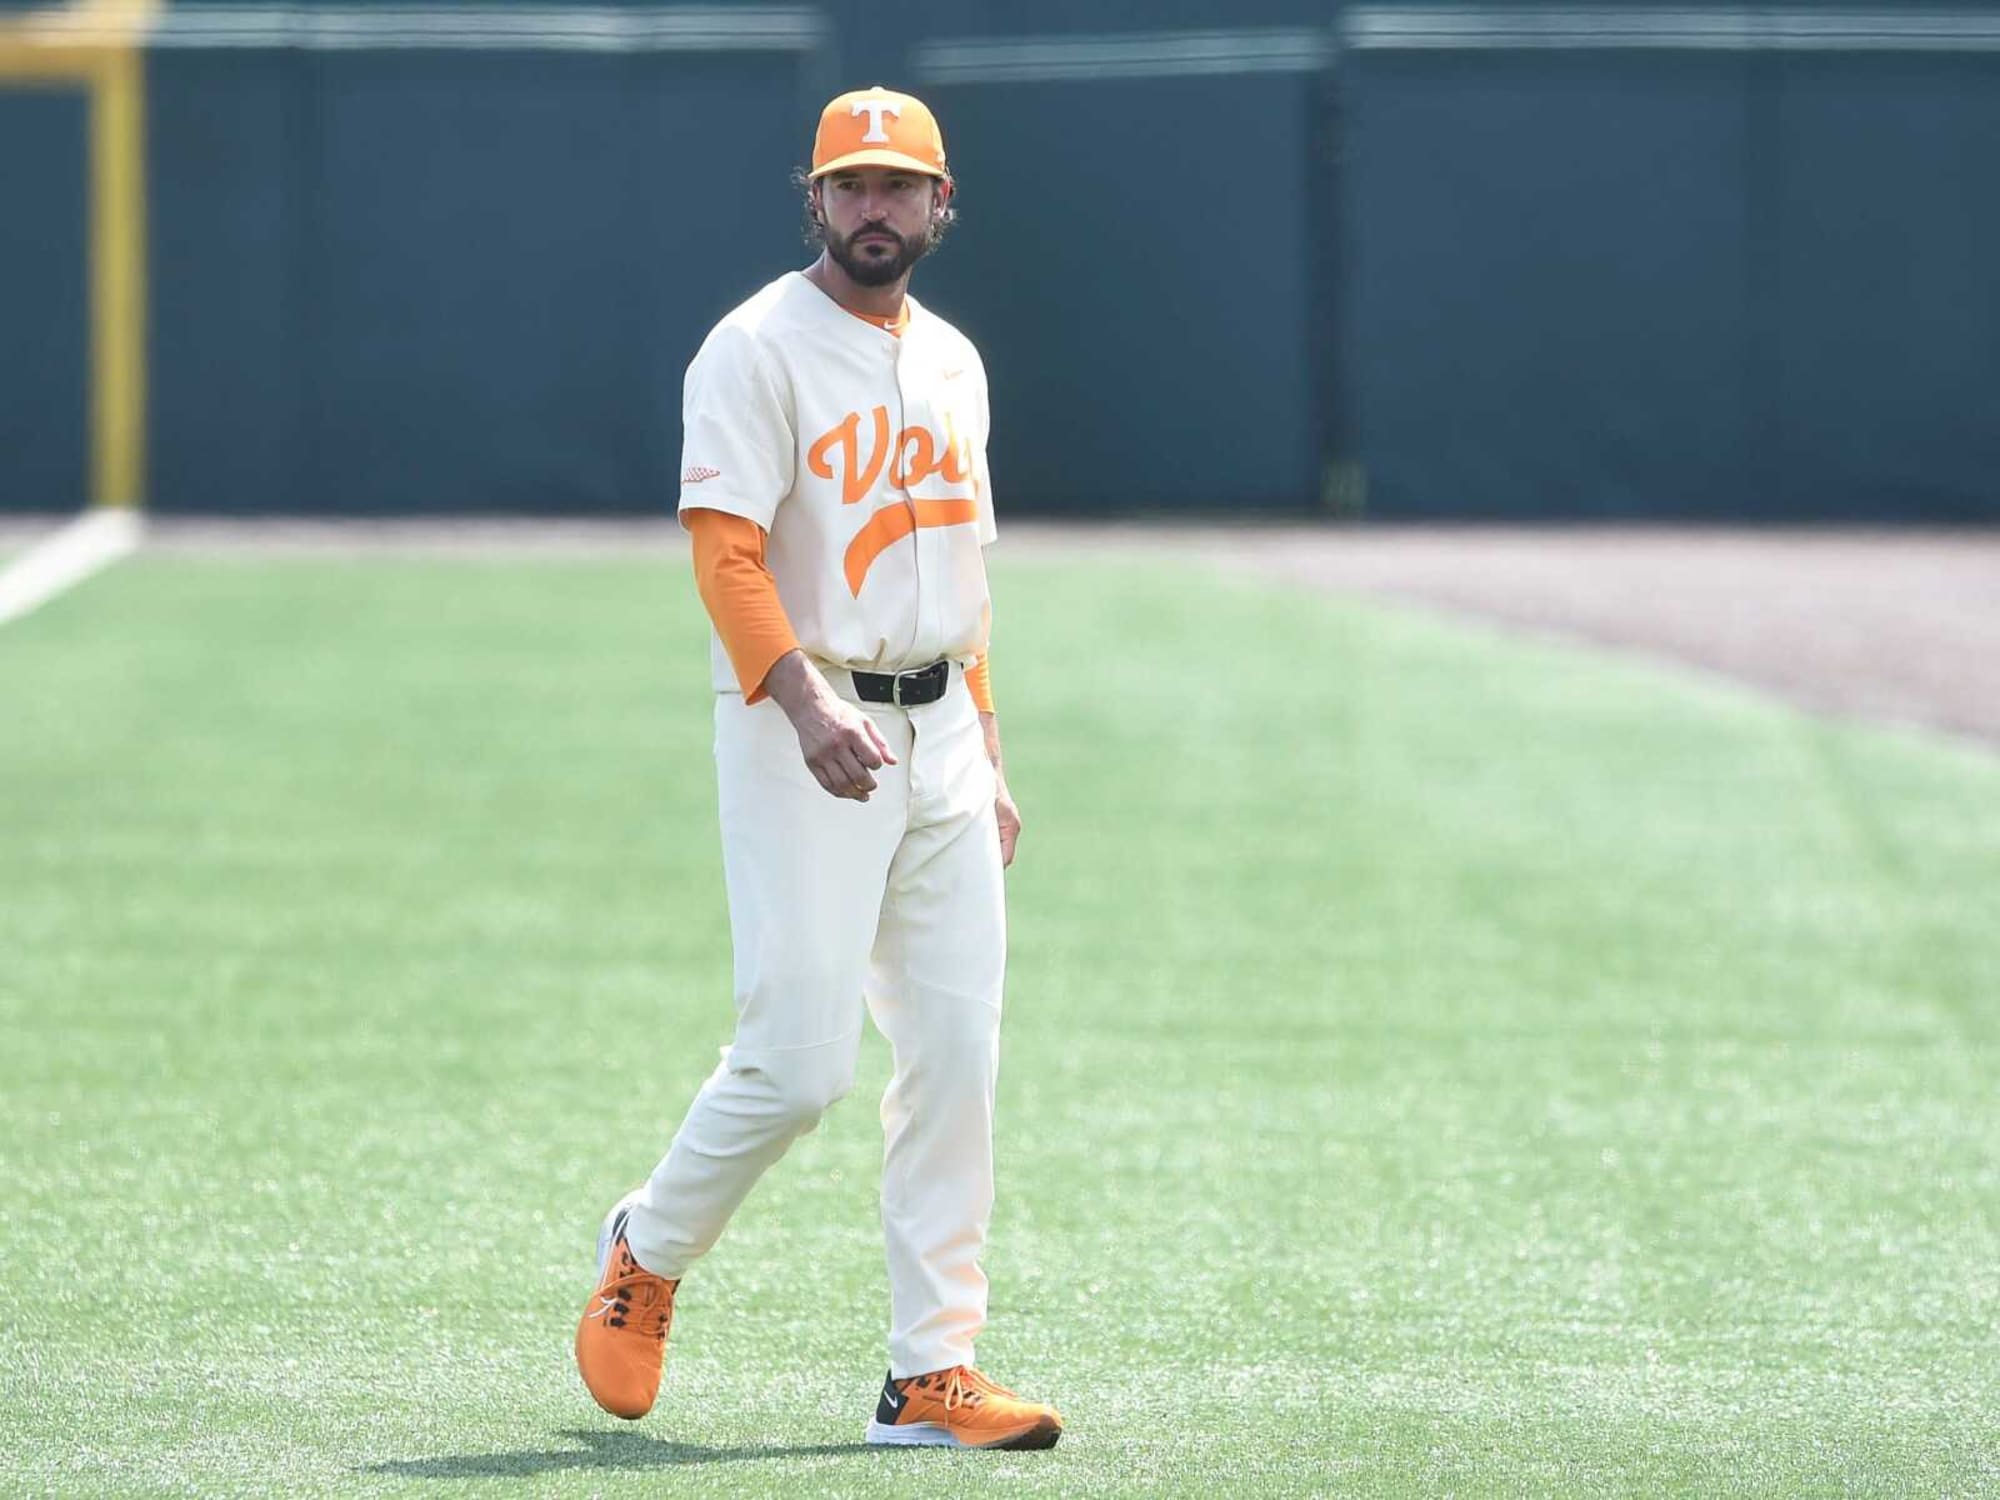 Tennessee baseball: Vols must own national ridicule after Super